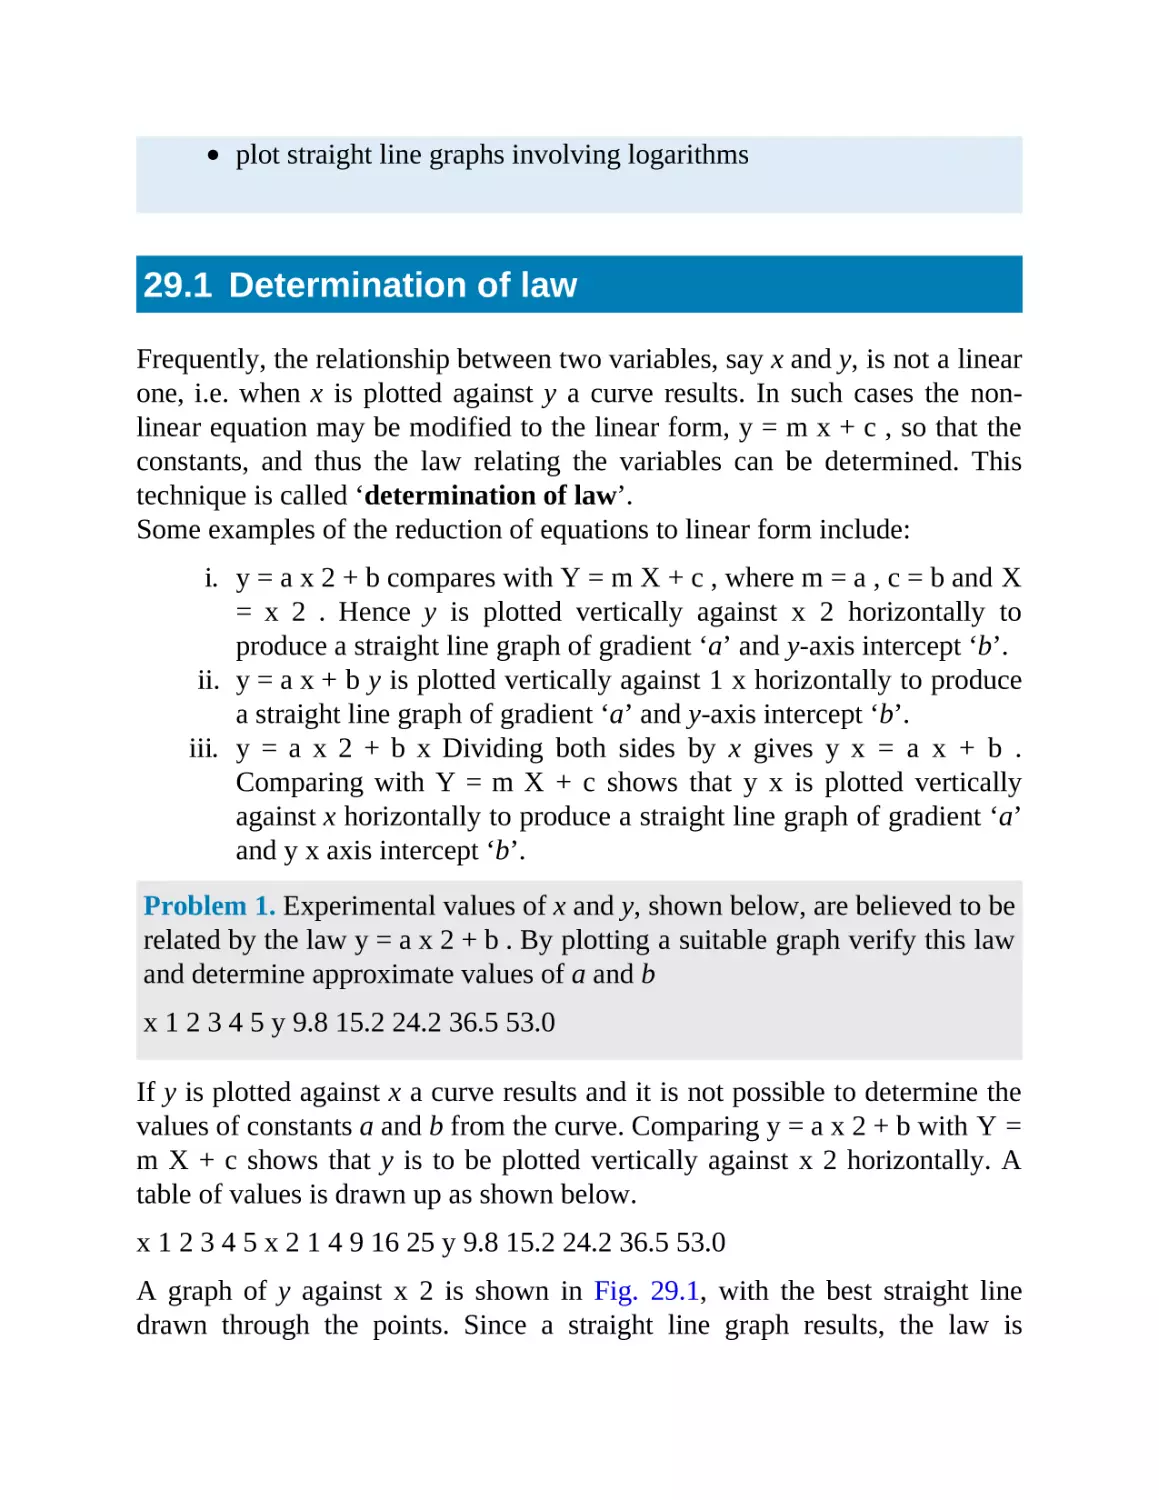 29.1 Determination of law